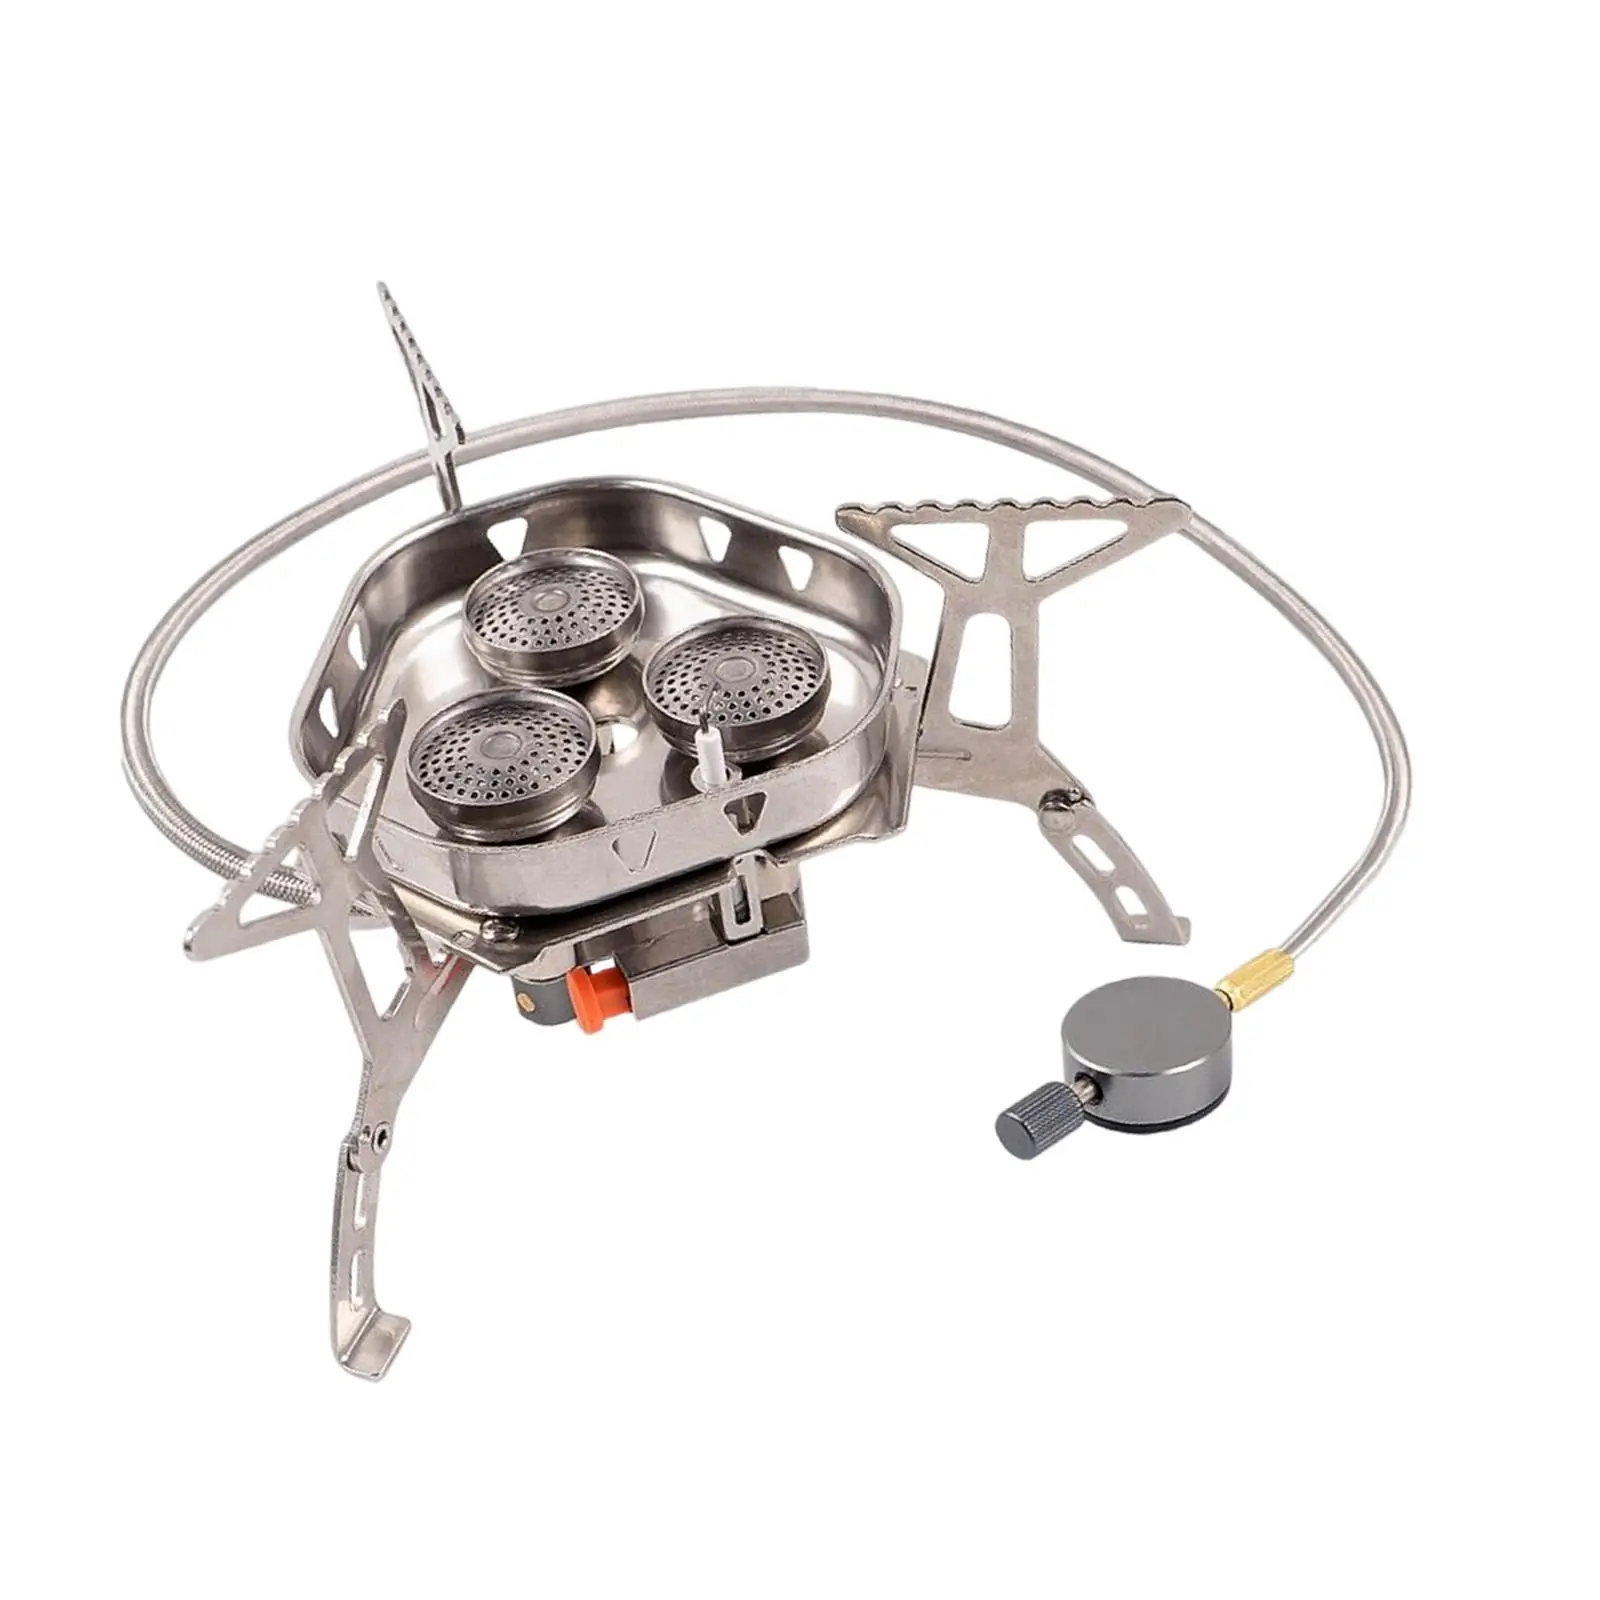 Camping Gas Stove Lightweight Collapsible Mini Cookware Cooking Tool Durable Adjustable for Outdoor Trekking Picnic Fishing